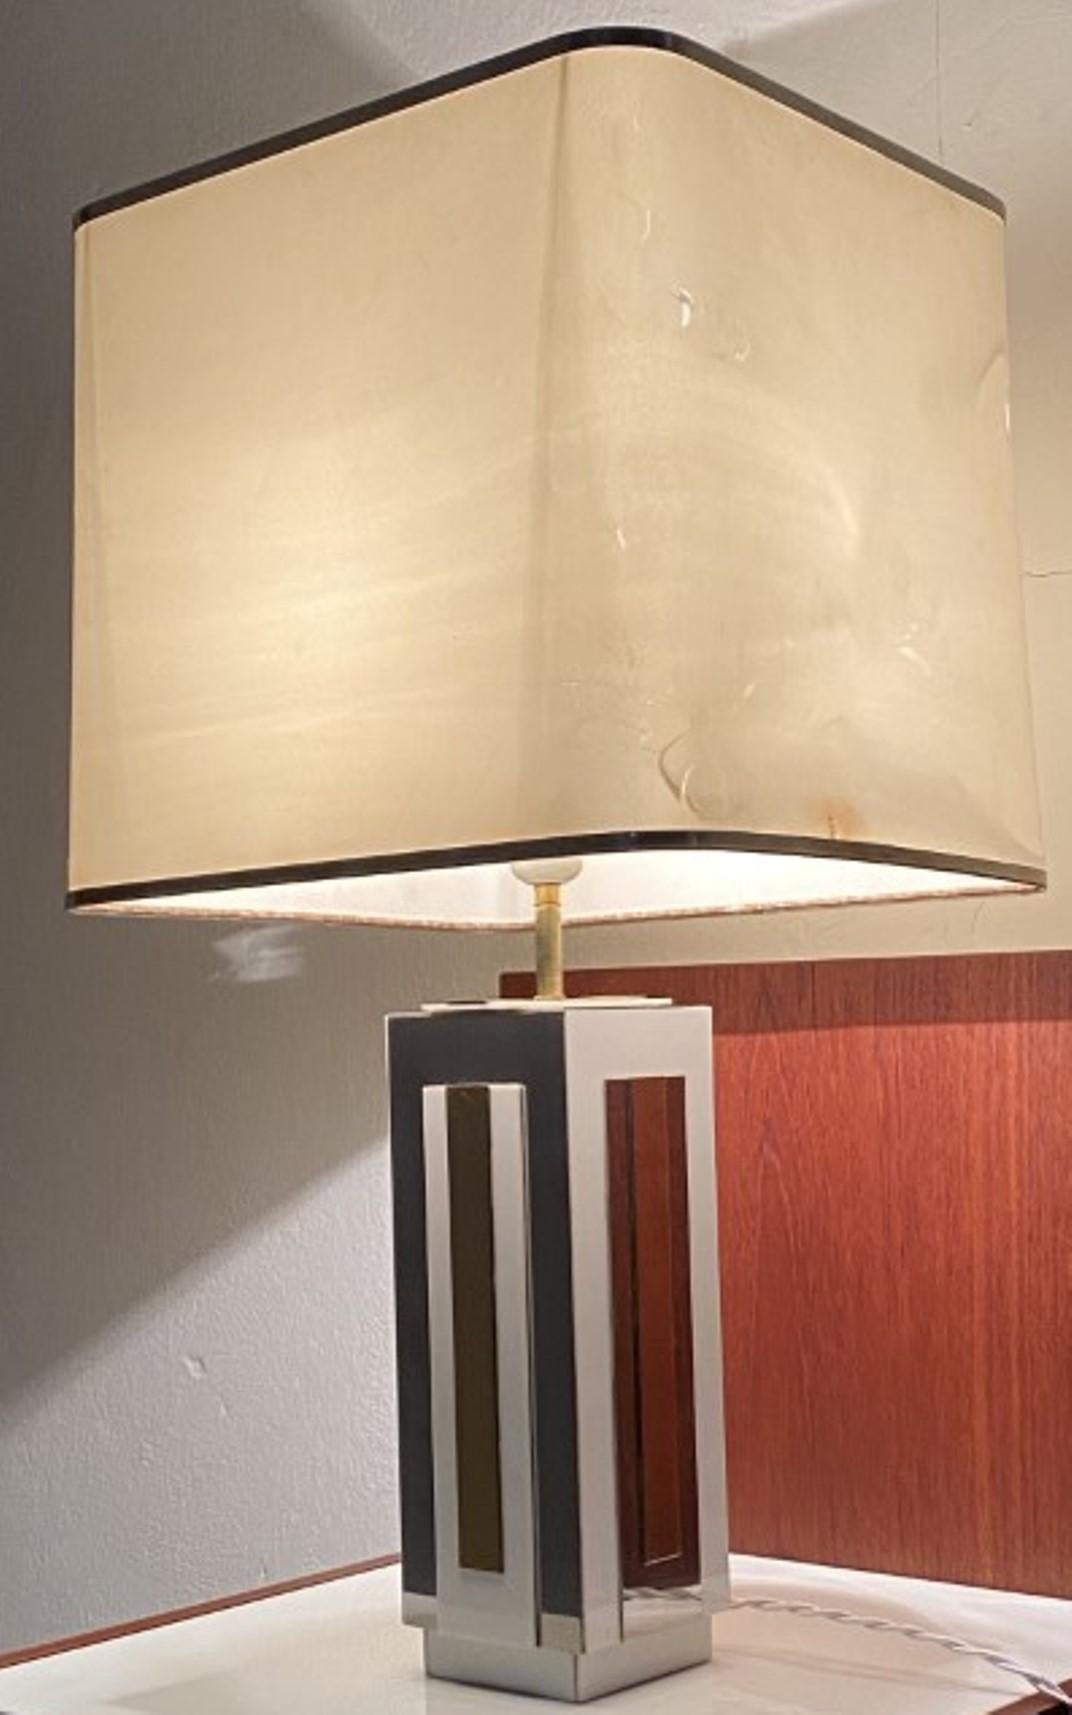 Mid-Century Modern Sculptural Relief Table Lamp by Sculptor 'PH Jean' 1970 Brass Inox Lucite Signed For Sale